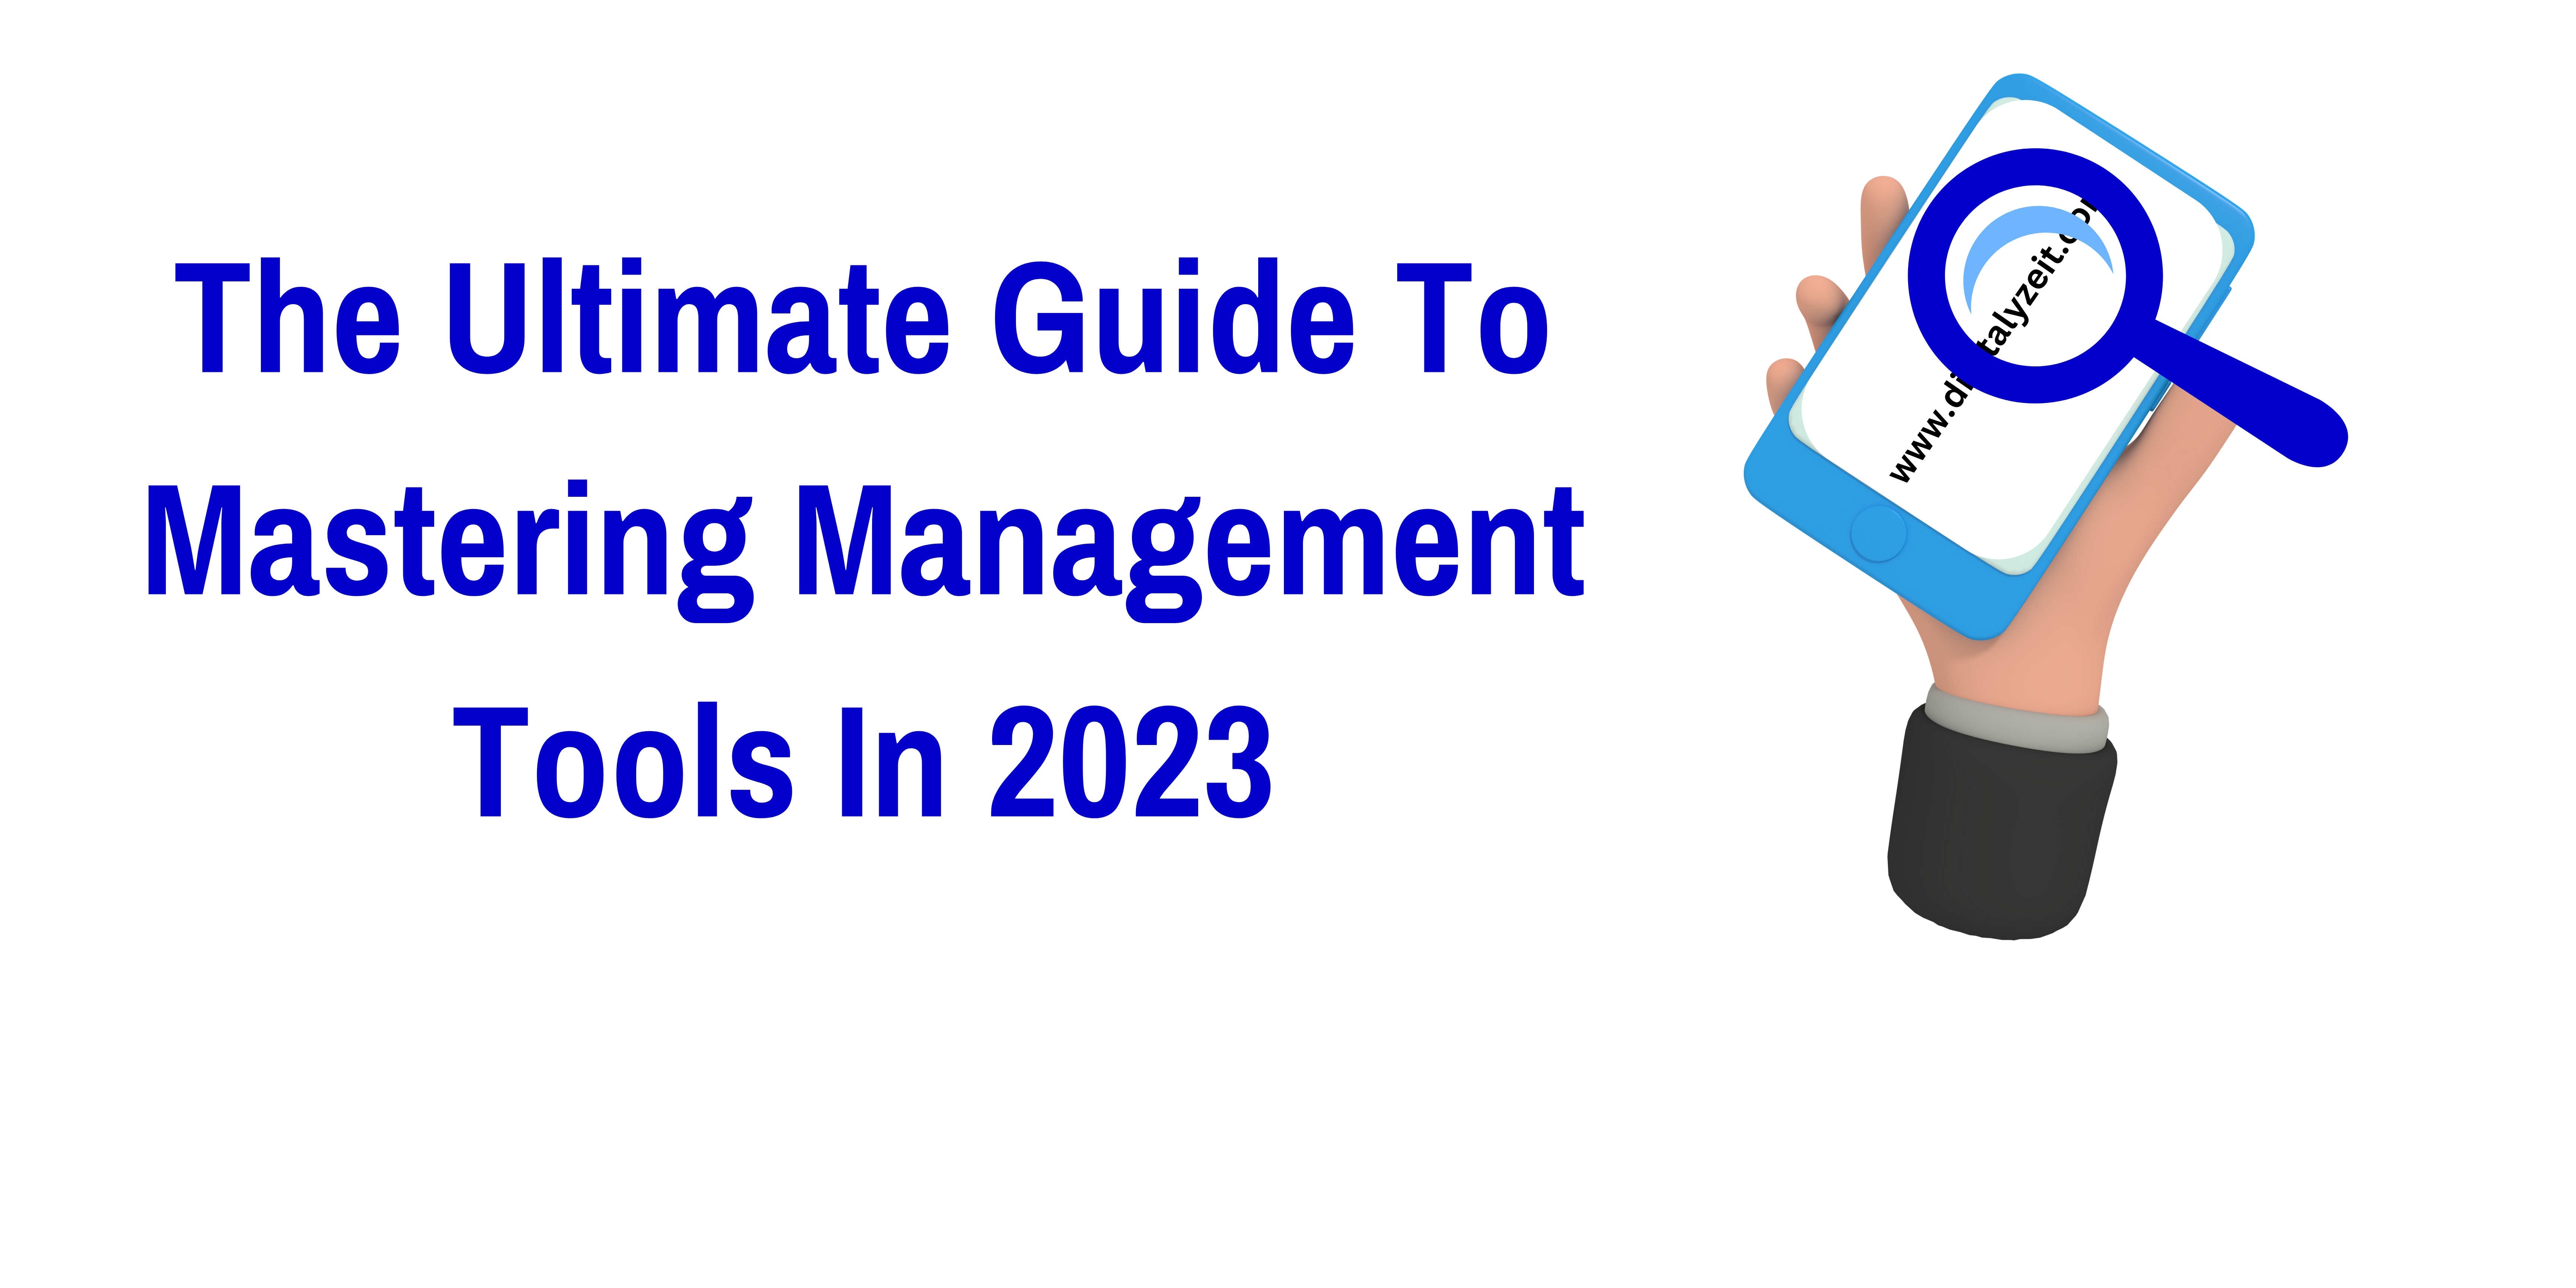 The Ultimate Guide to Mastering Management Tools in 2023!